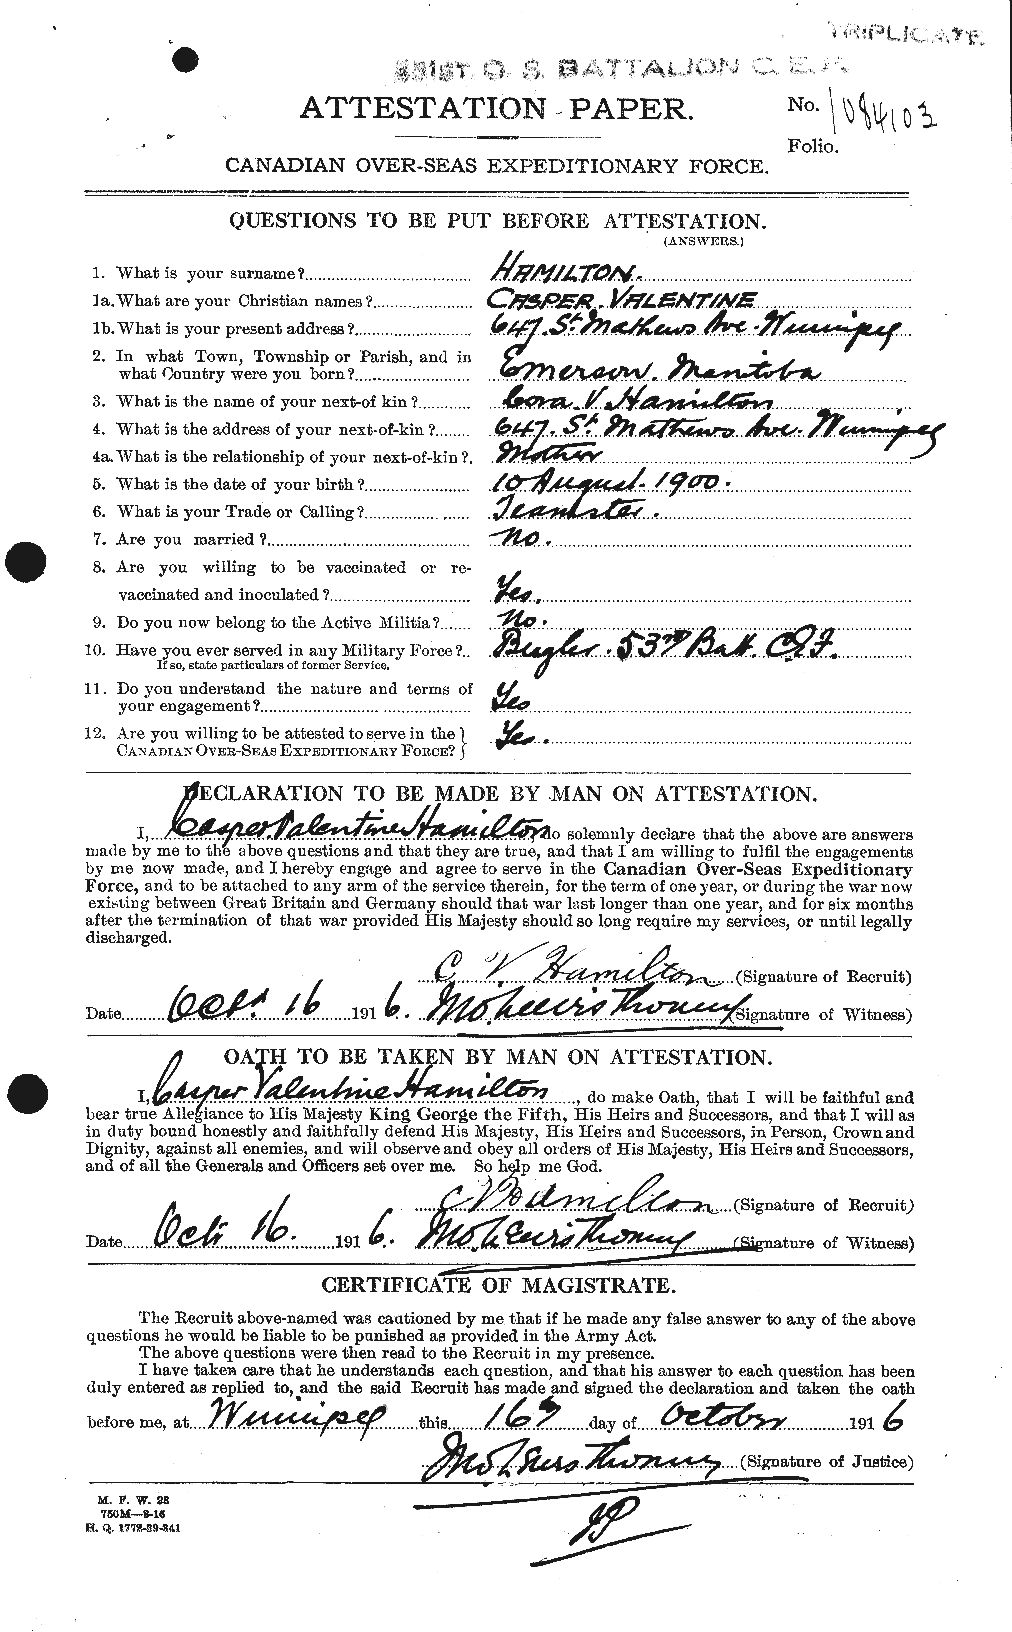 Personnel Records of the First World War - CEF 375283a